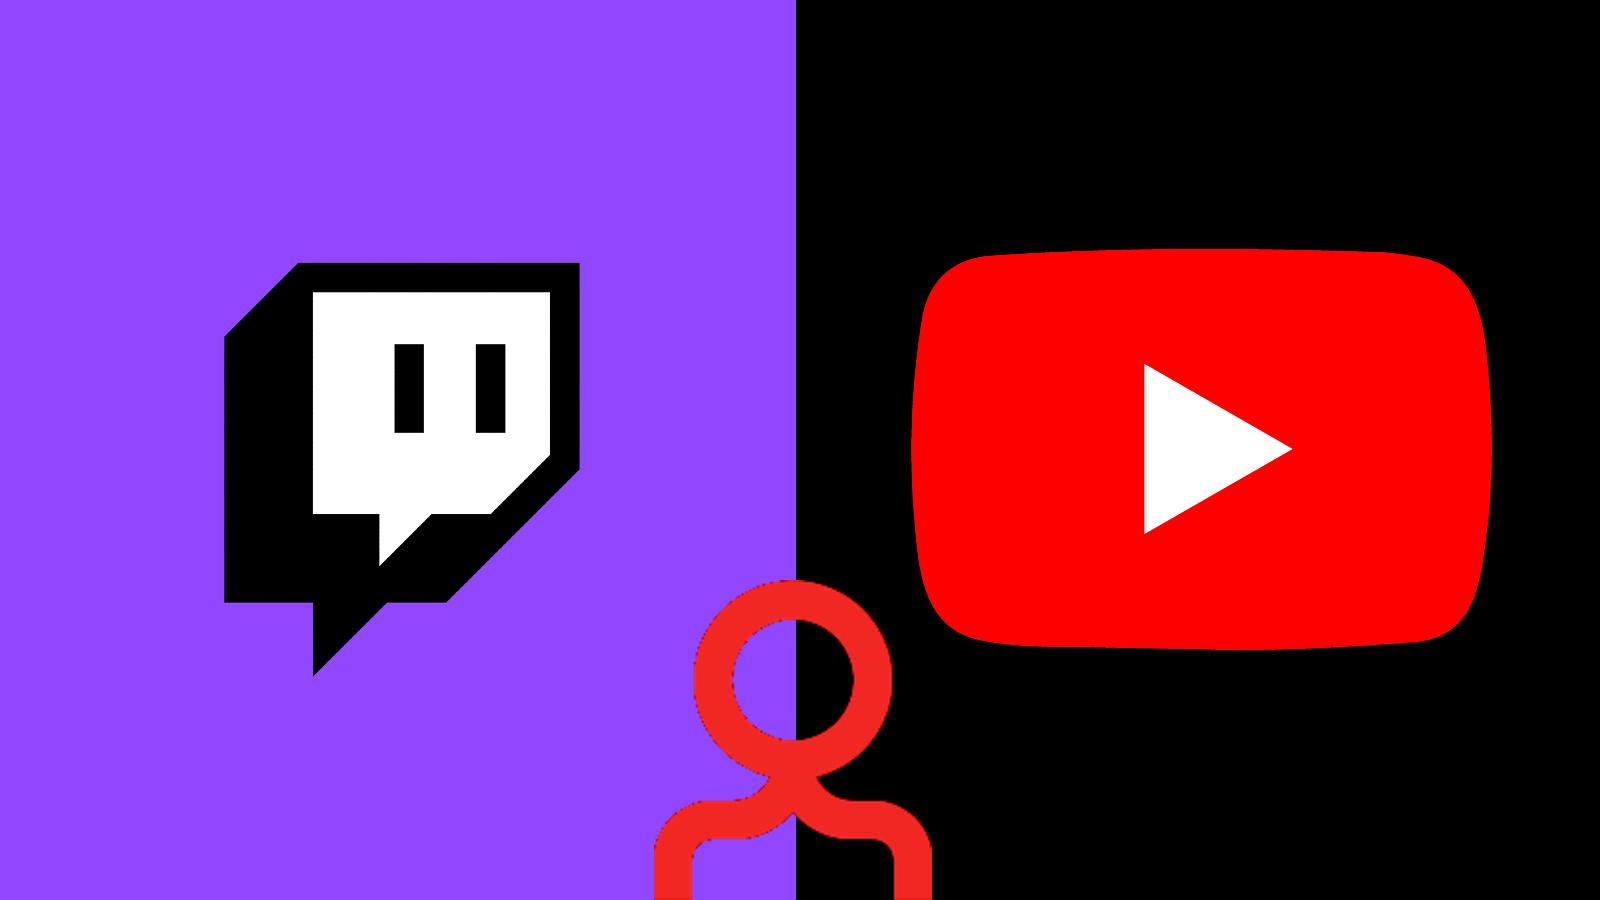 Twitch and youtube logos